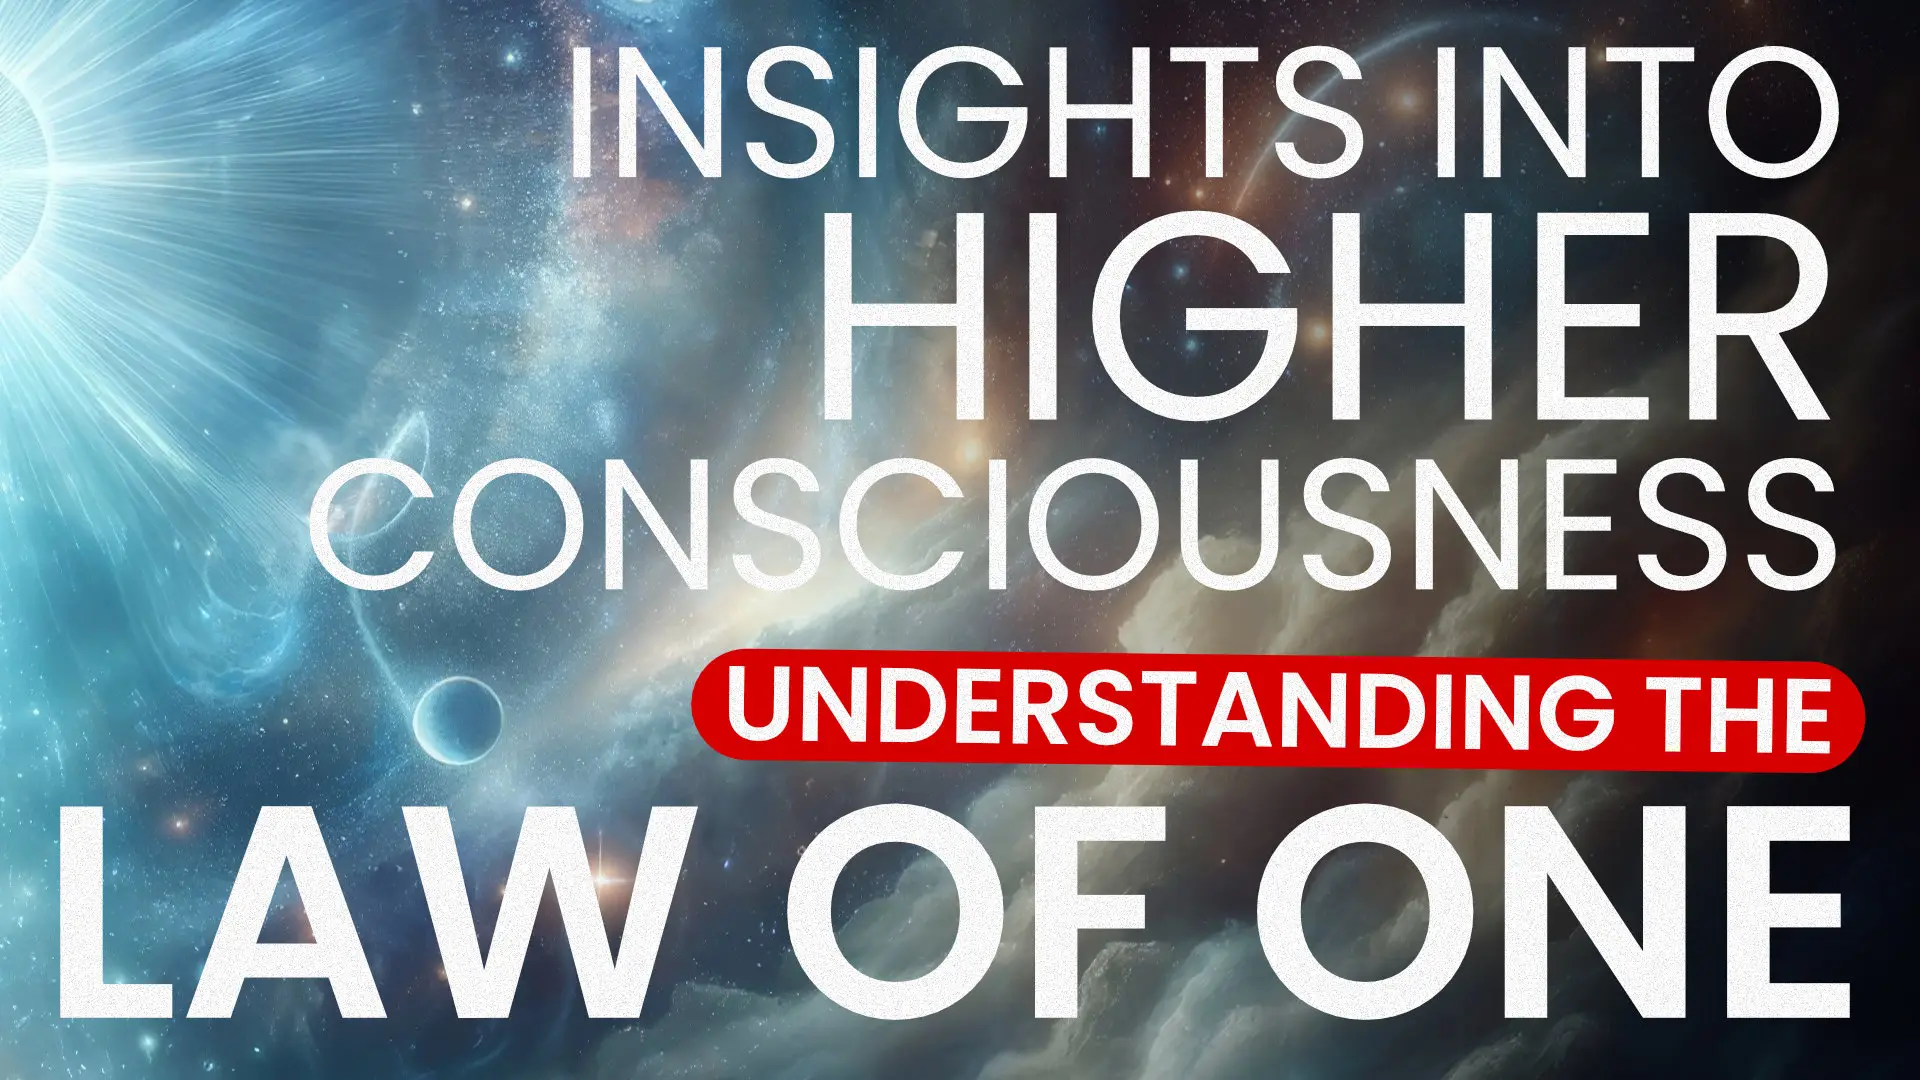 The Law of One: Insights Into Higher Consciousness